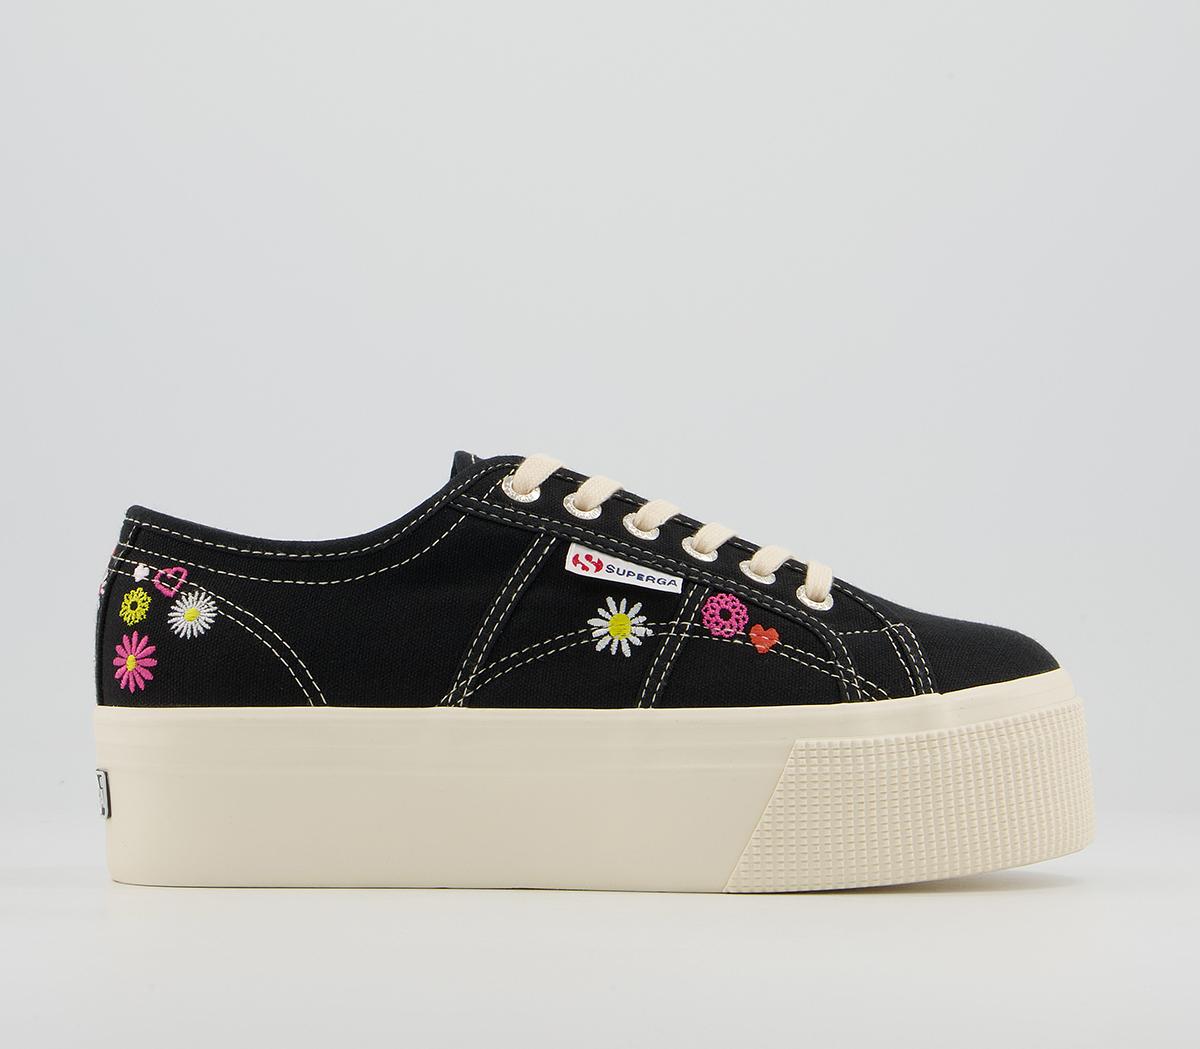 Superga2790 TrainersBlack White Floral Embroidery Exclusive